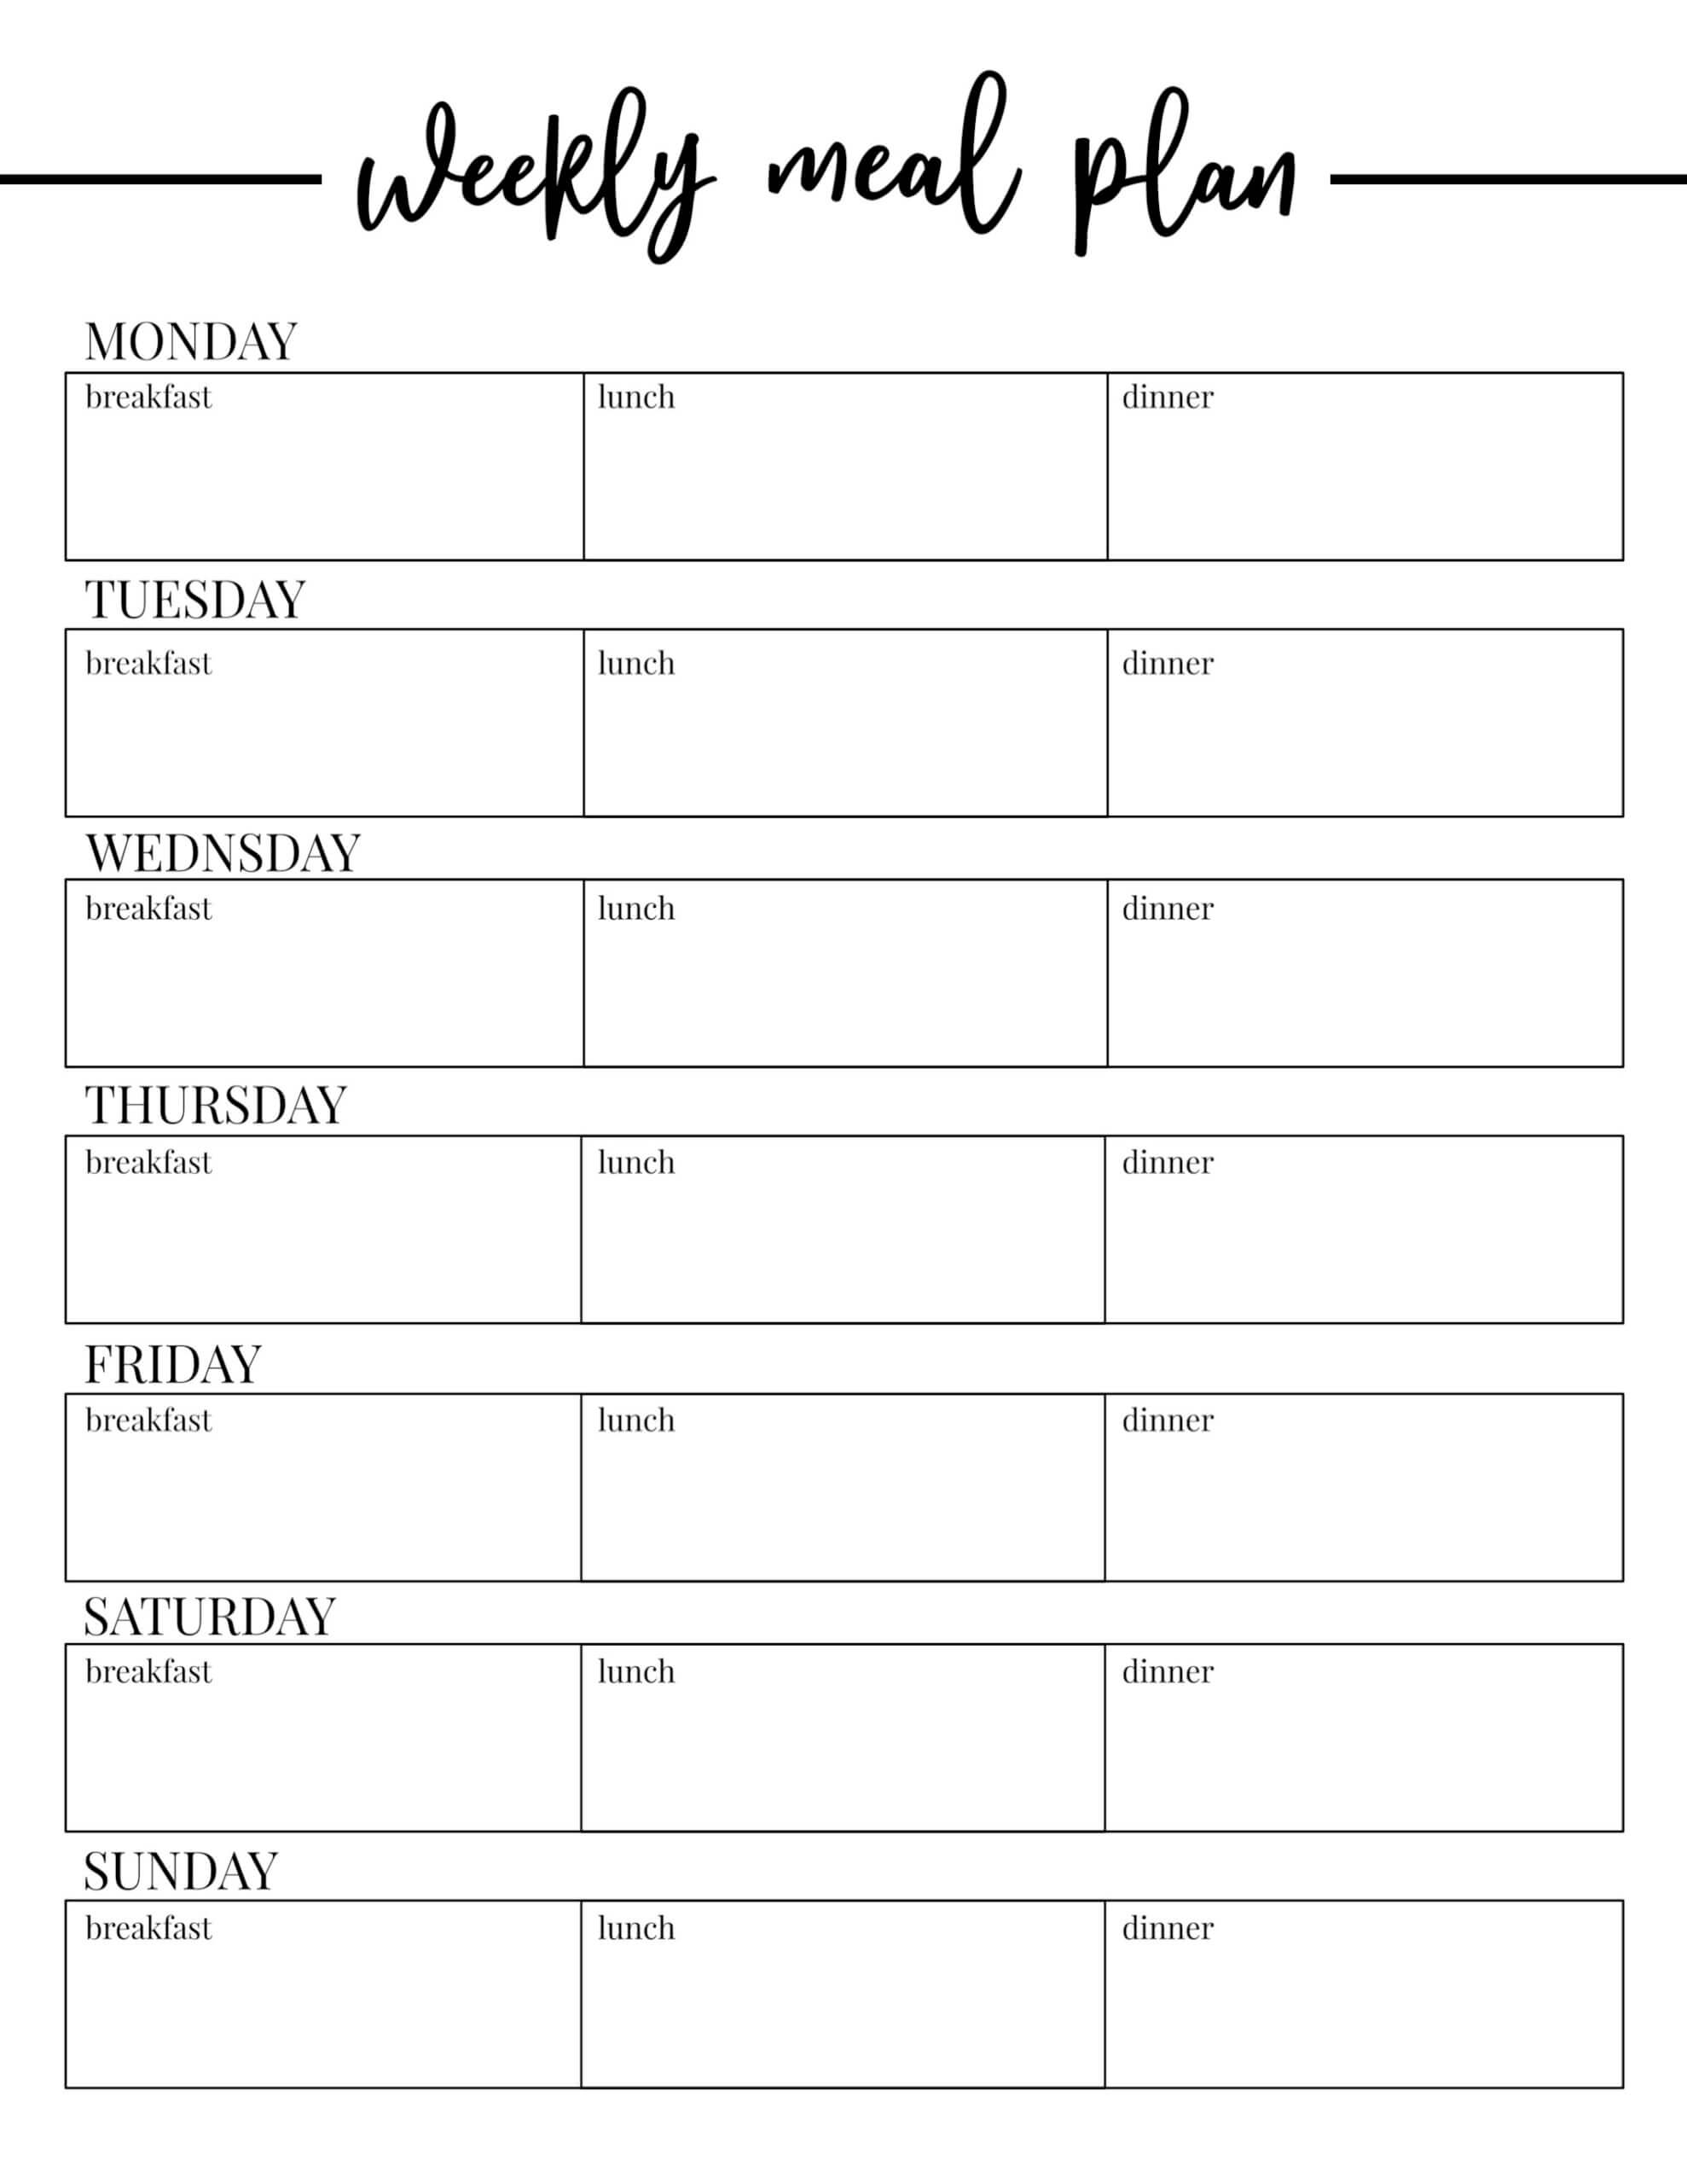 010 Template Ideas Meal Plan Pdf Frightening Weekly Planning With Blank Meal Plan Template